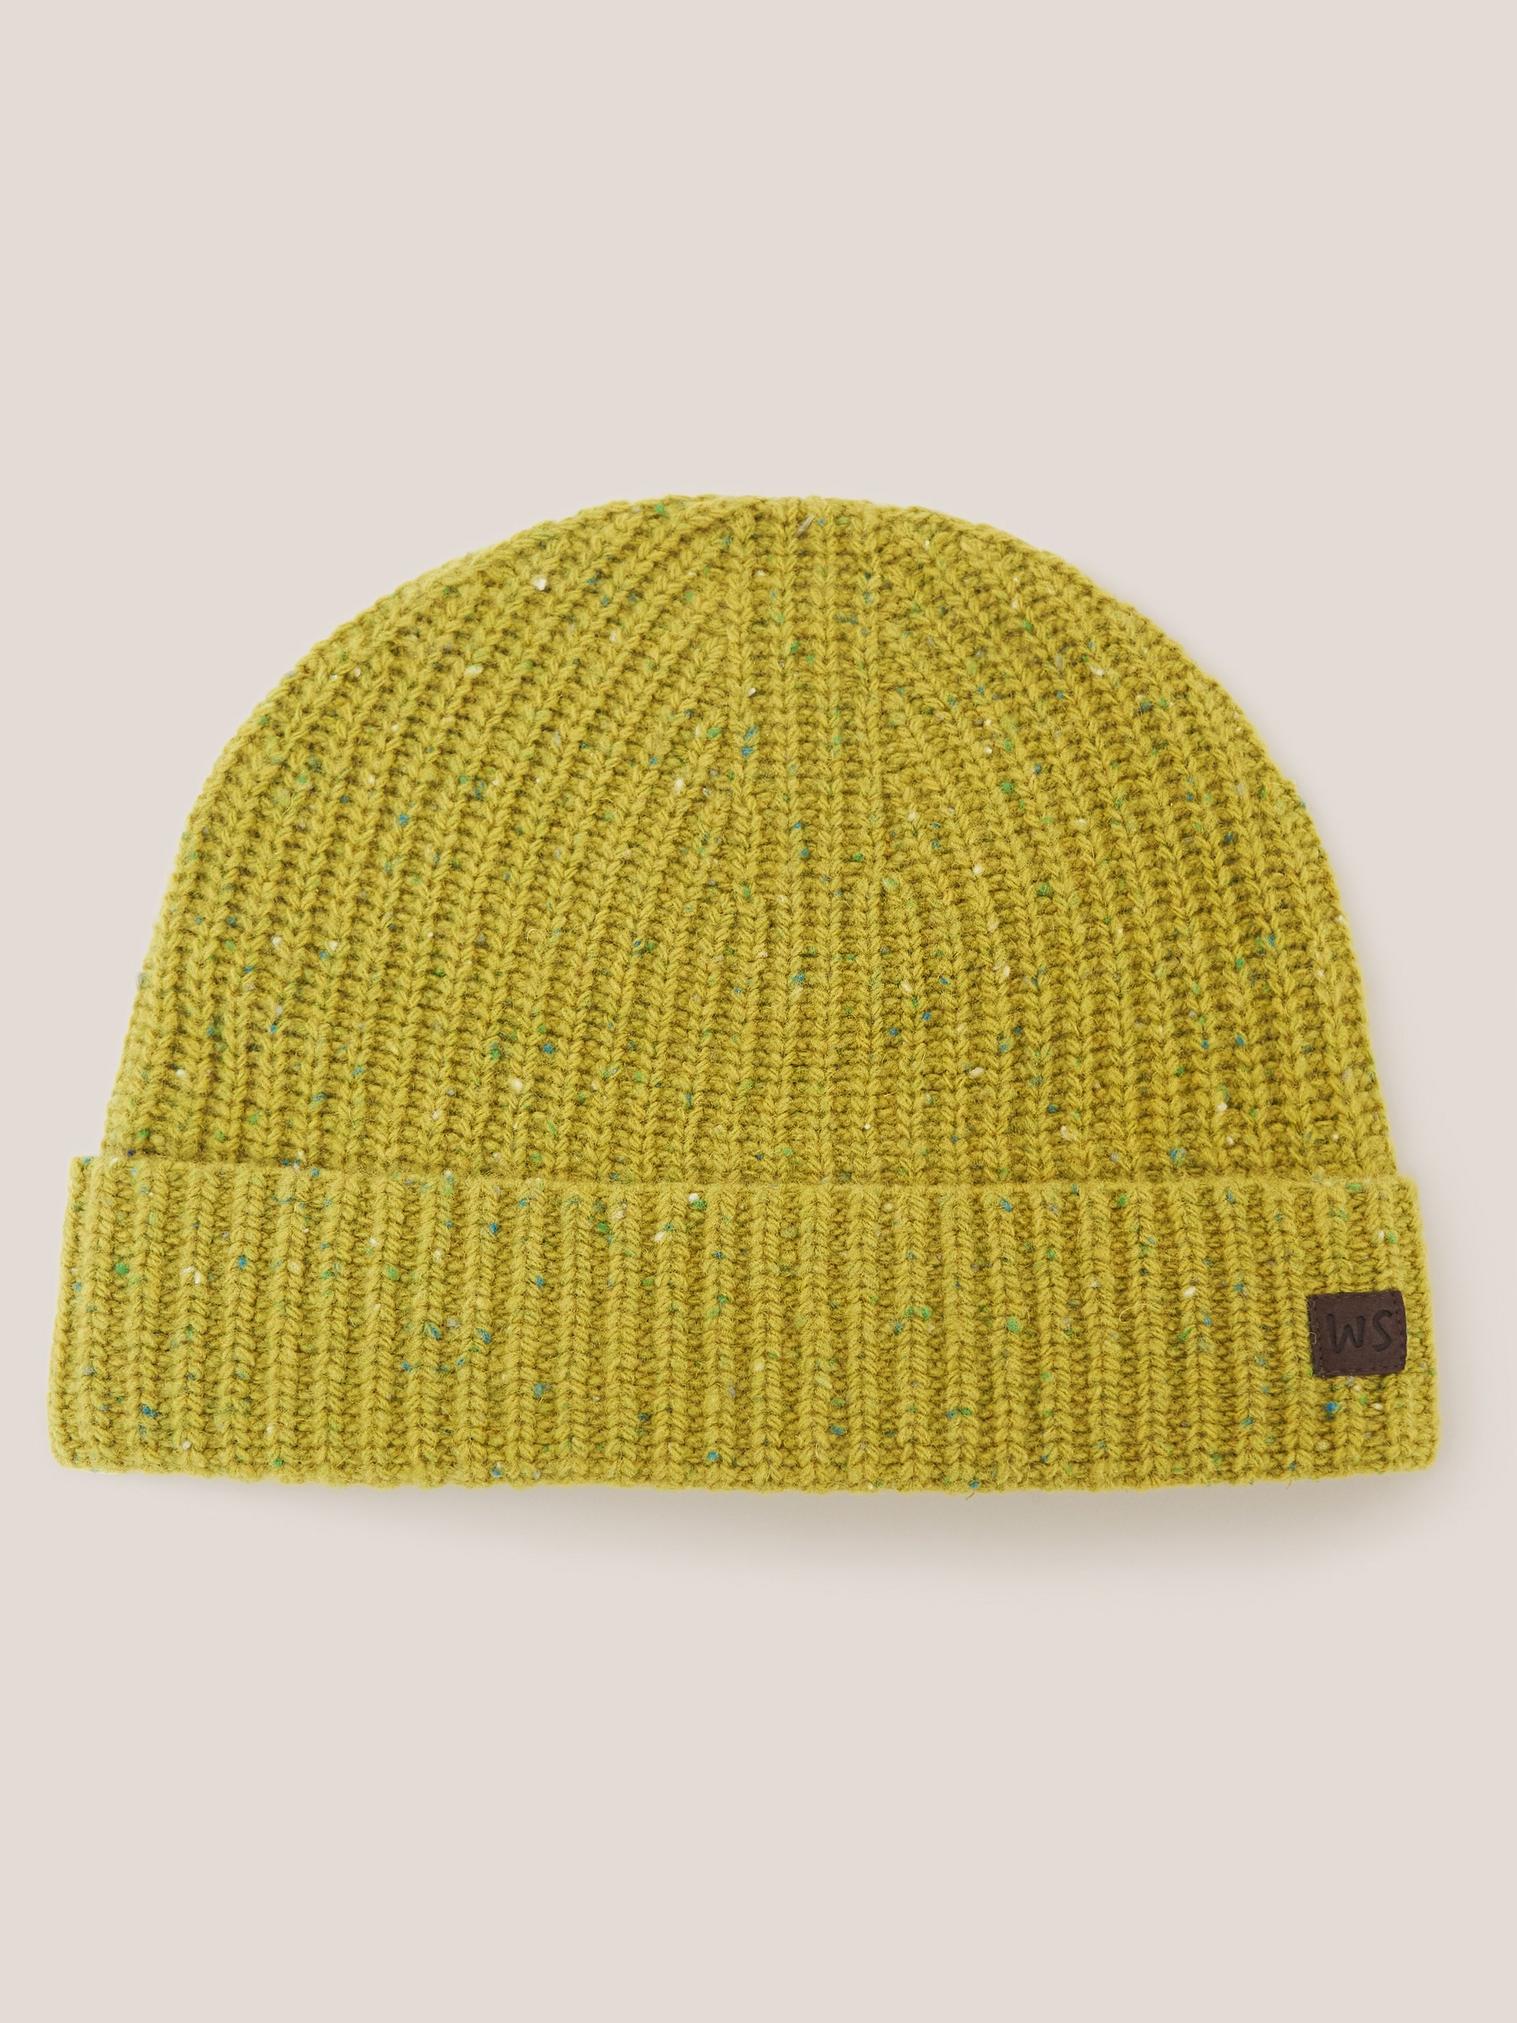 Wool Ribbed Beanie in MID CHART - FLAT FRONT